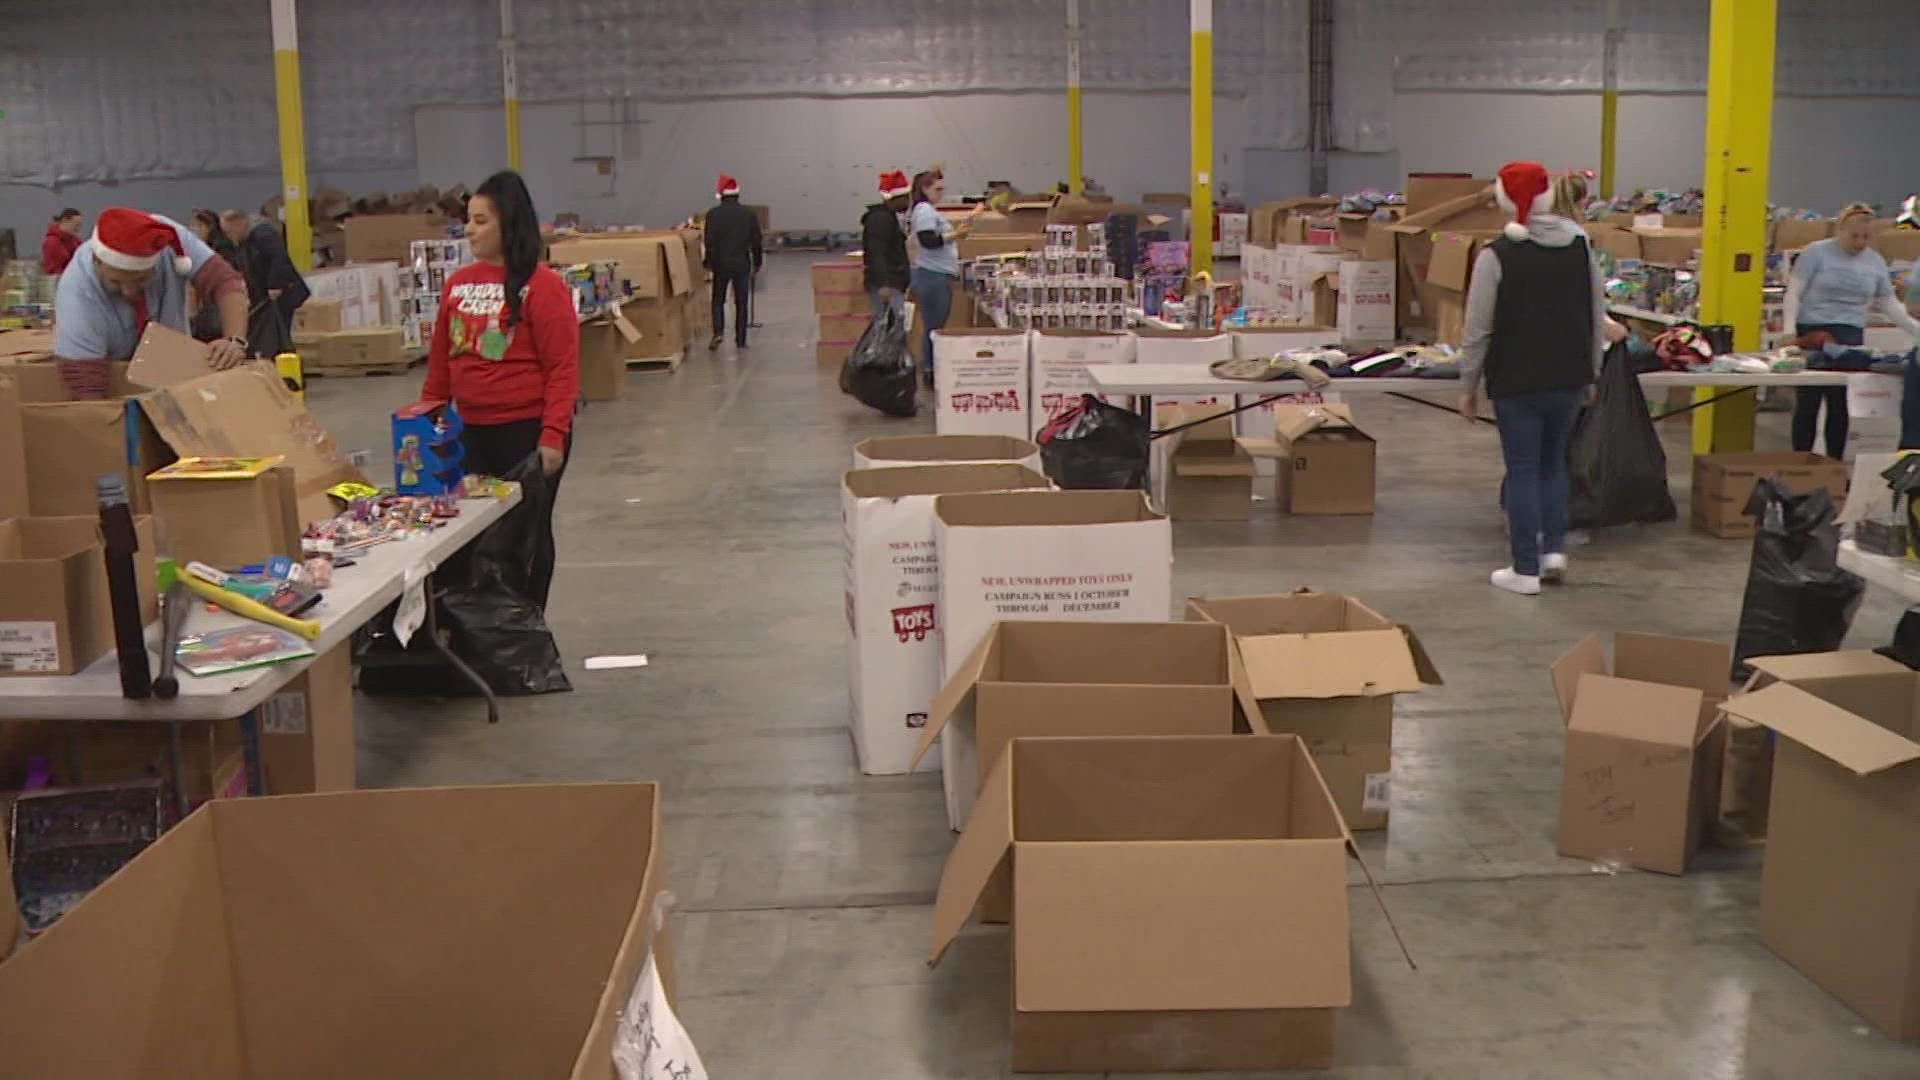 The holiday season is crunch time for the Salvation Army. Officials with the nonprofit said they're in desperate need of donations, now more than ever.